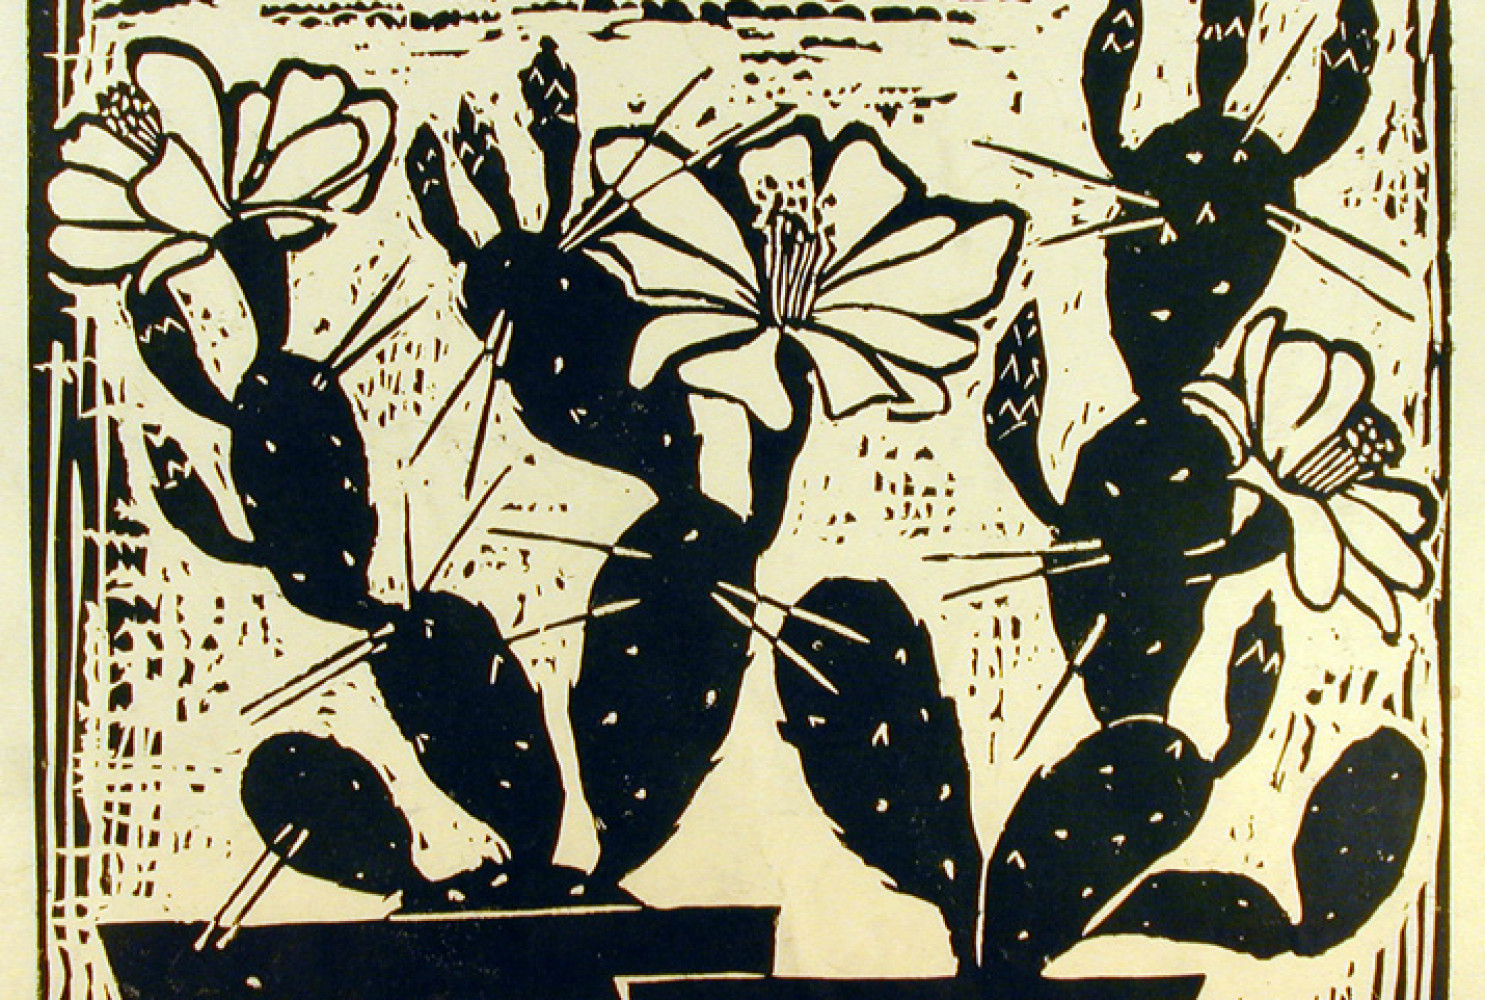 Cactus, By Corrie McCallum (American, 1914–2009); Woodblock print on paper; 11 x 17 inches; Bequest of Josephine Pinckney
